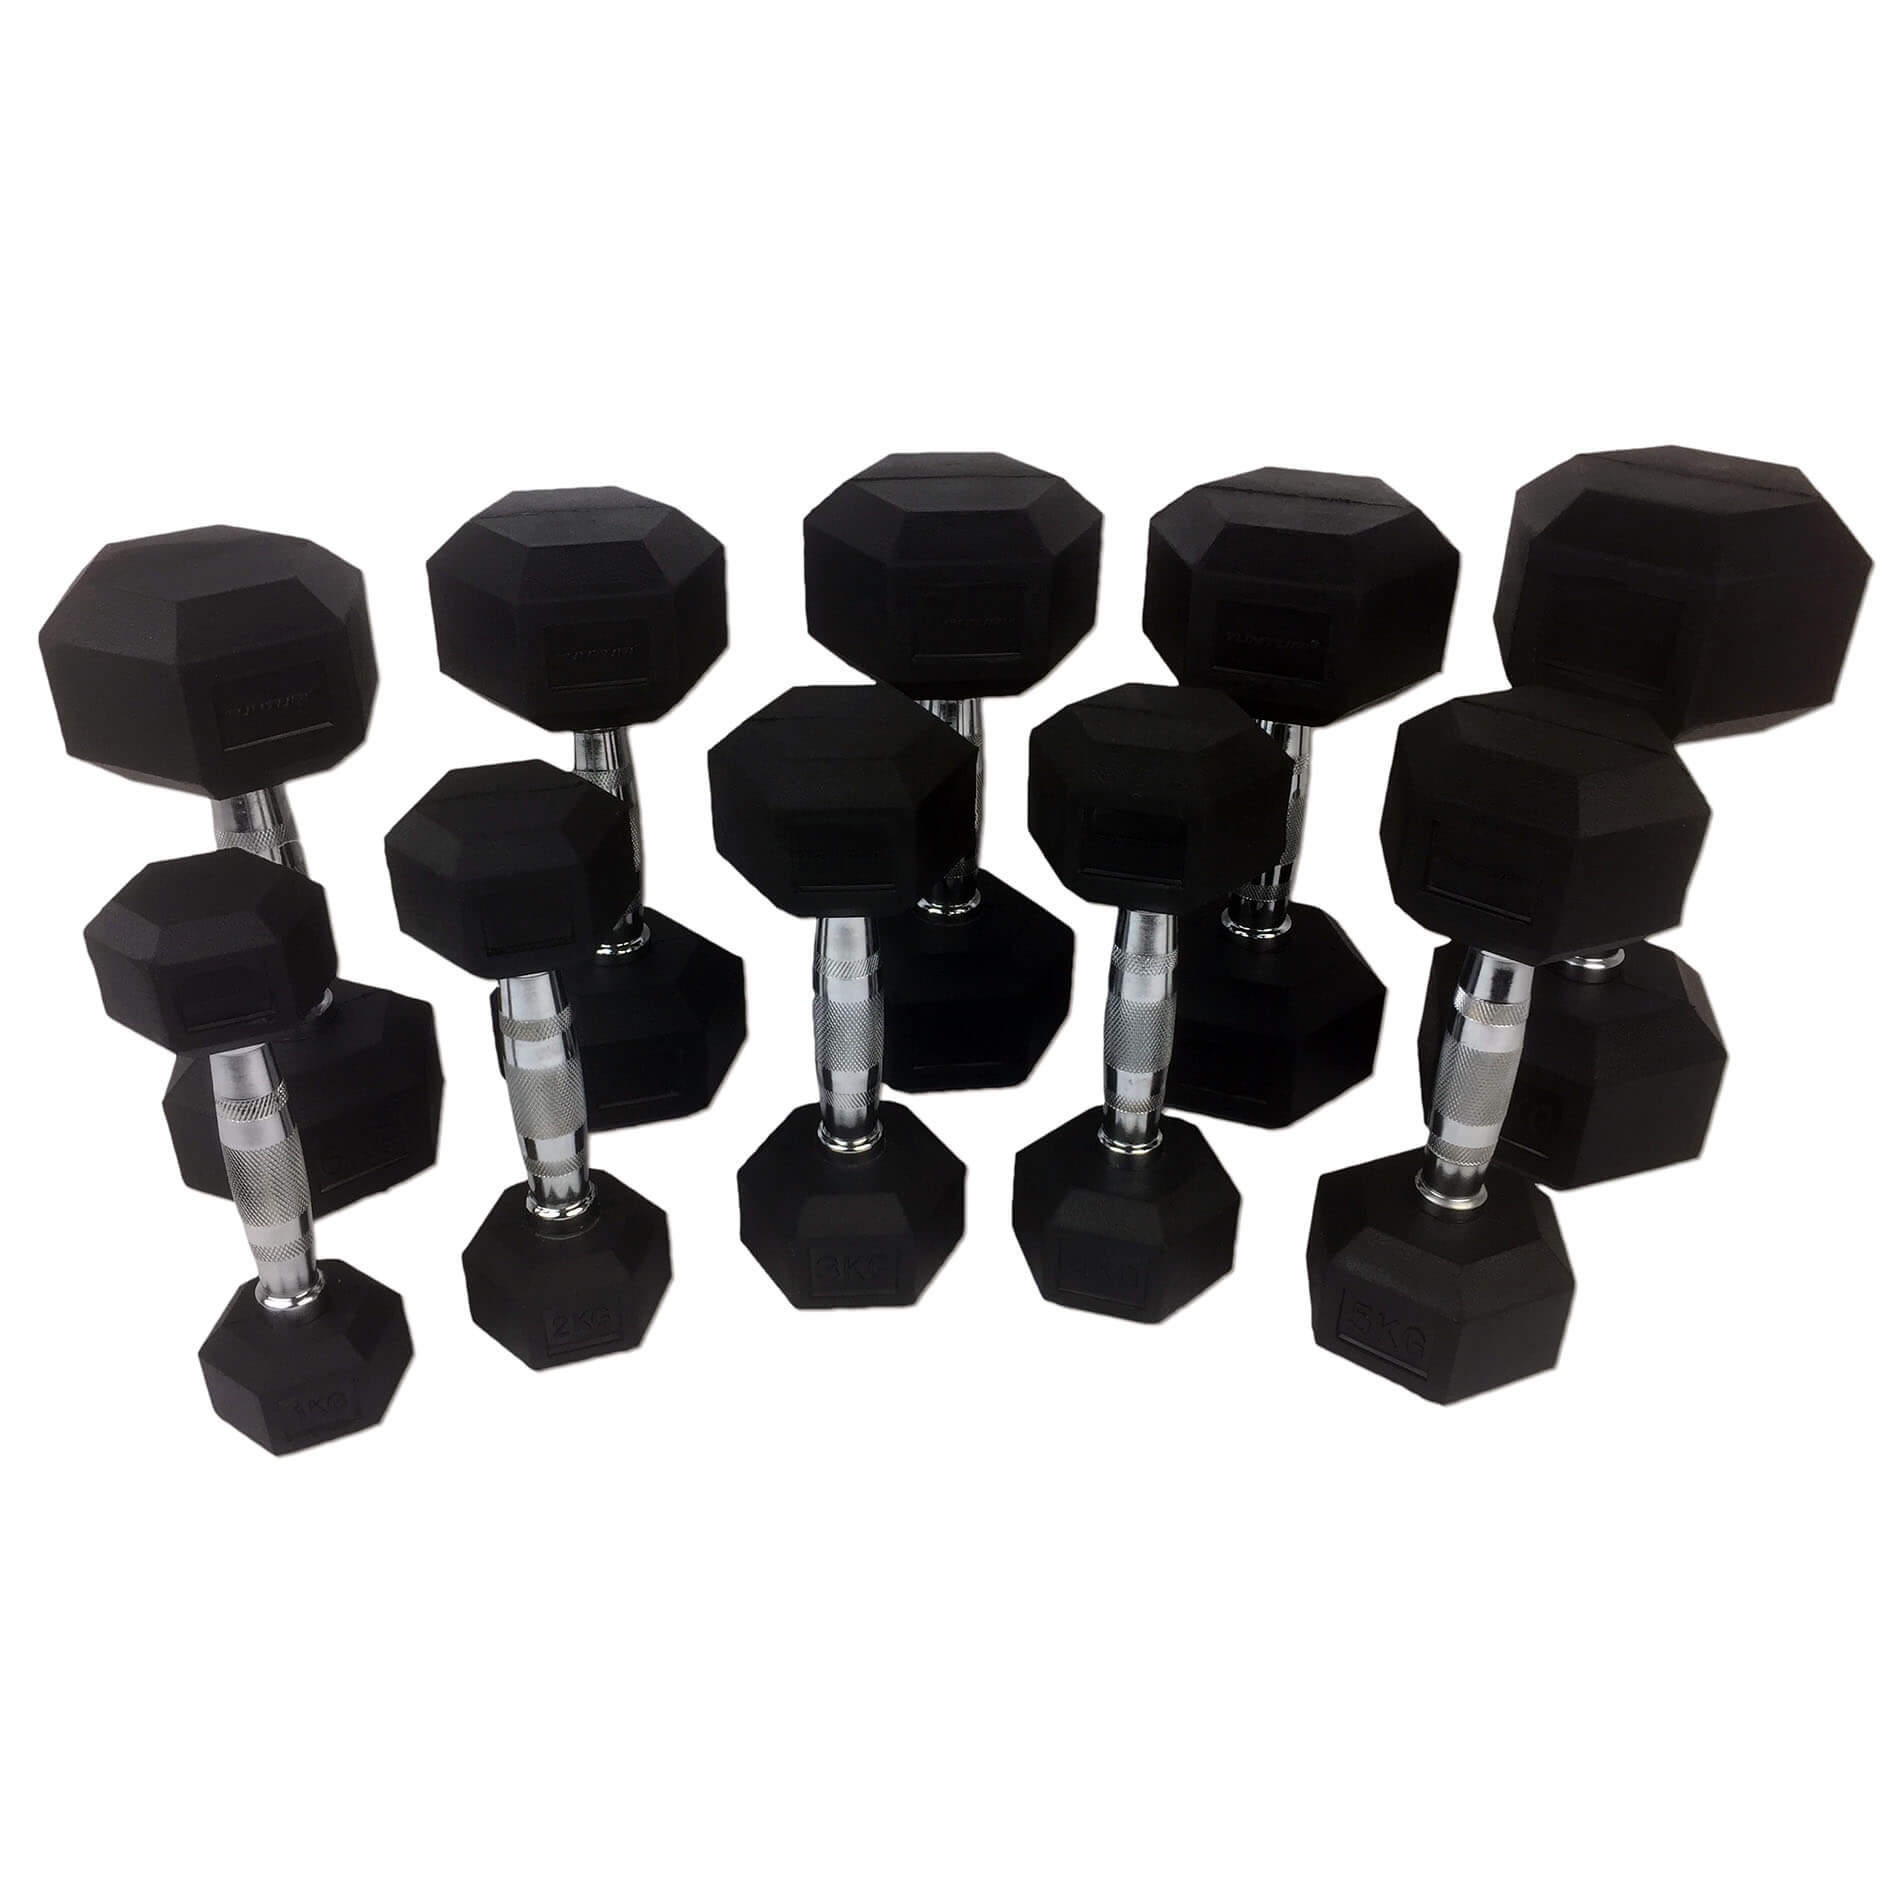 1-10kg Chrome Dumbell Set No Rack New And Boxed 